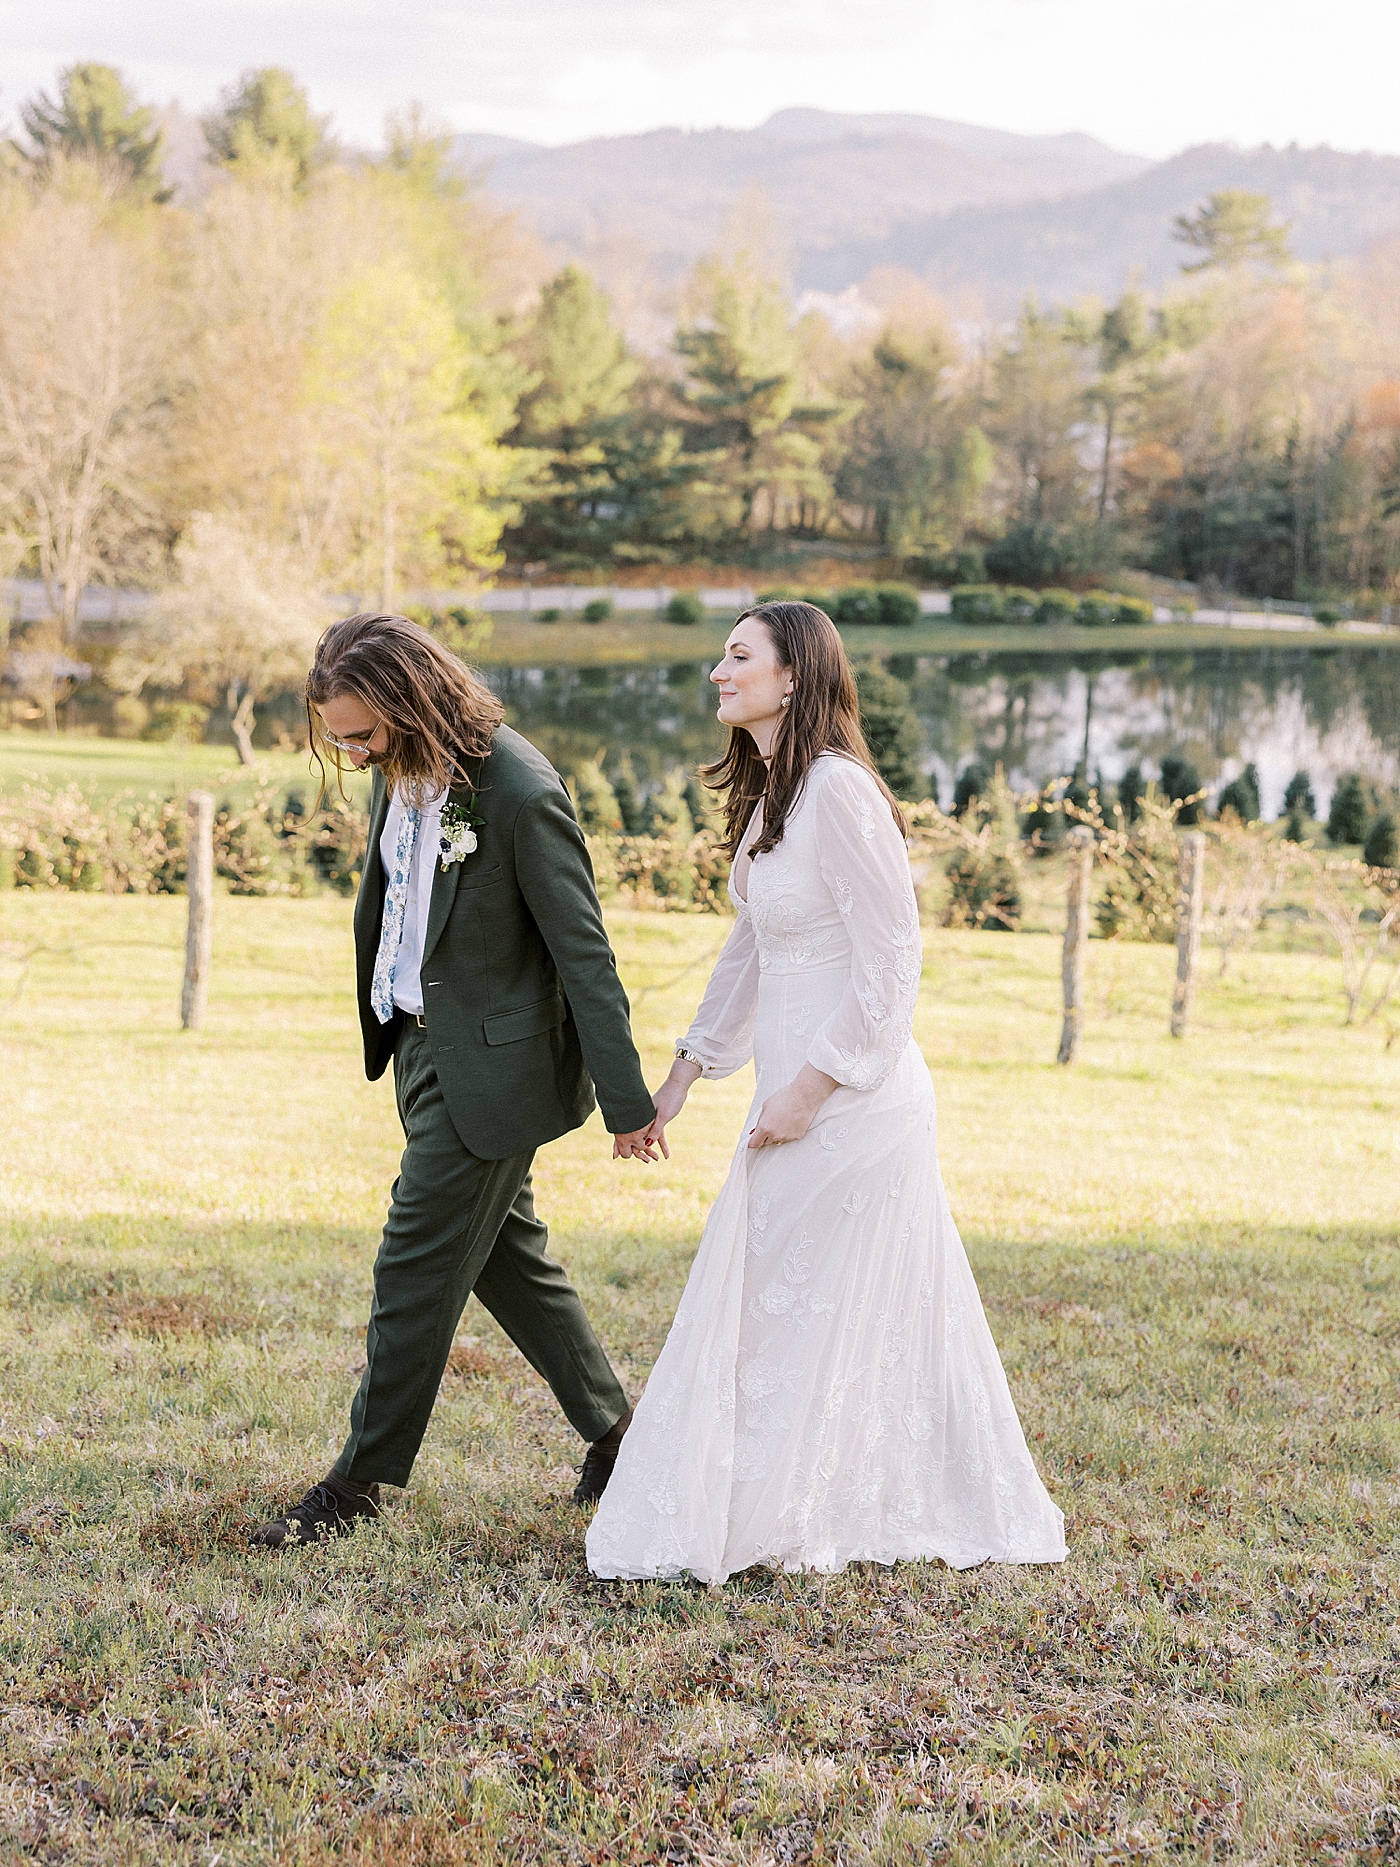 Bride and groom walking hand in hand through a field | Photo by Diane Sotero Photography